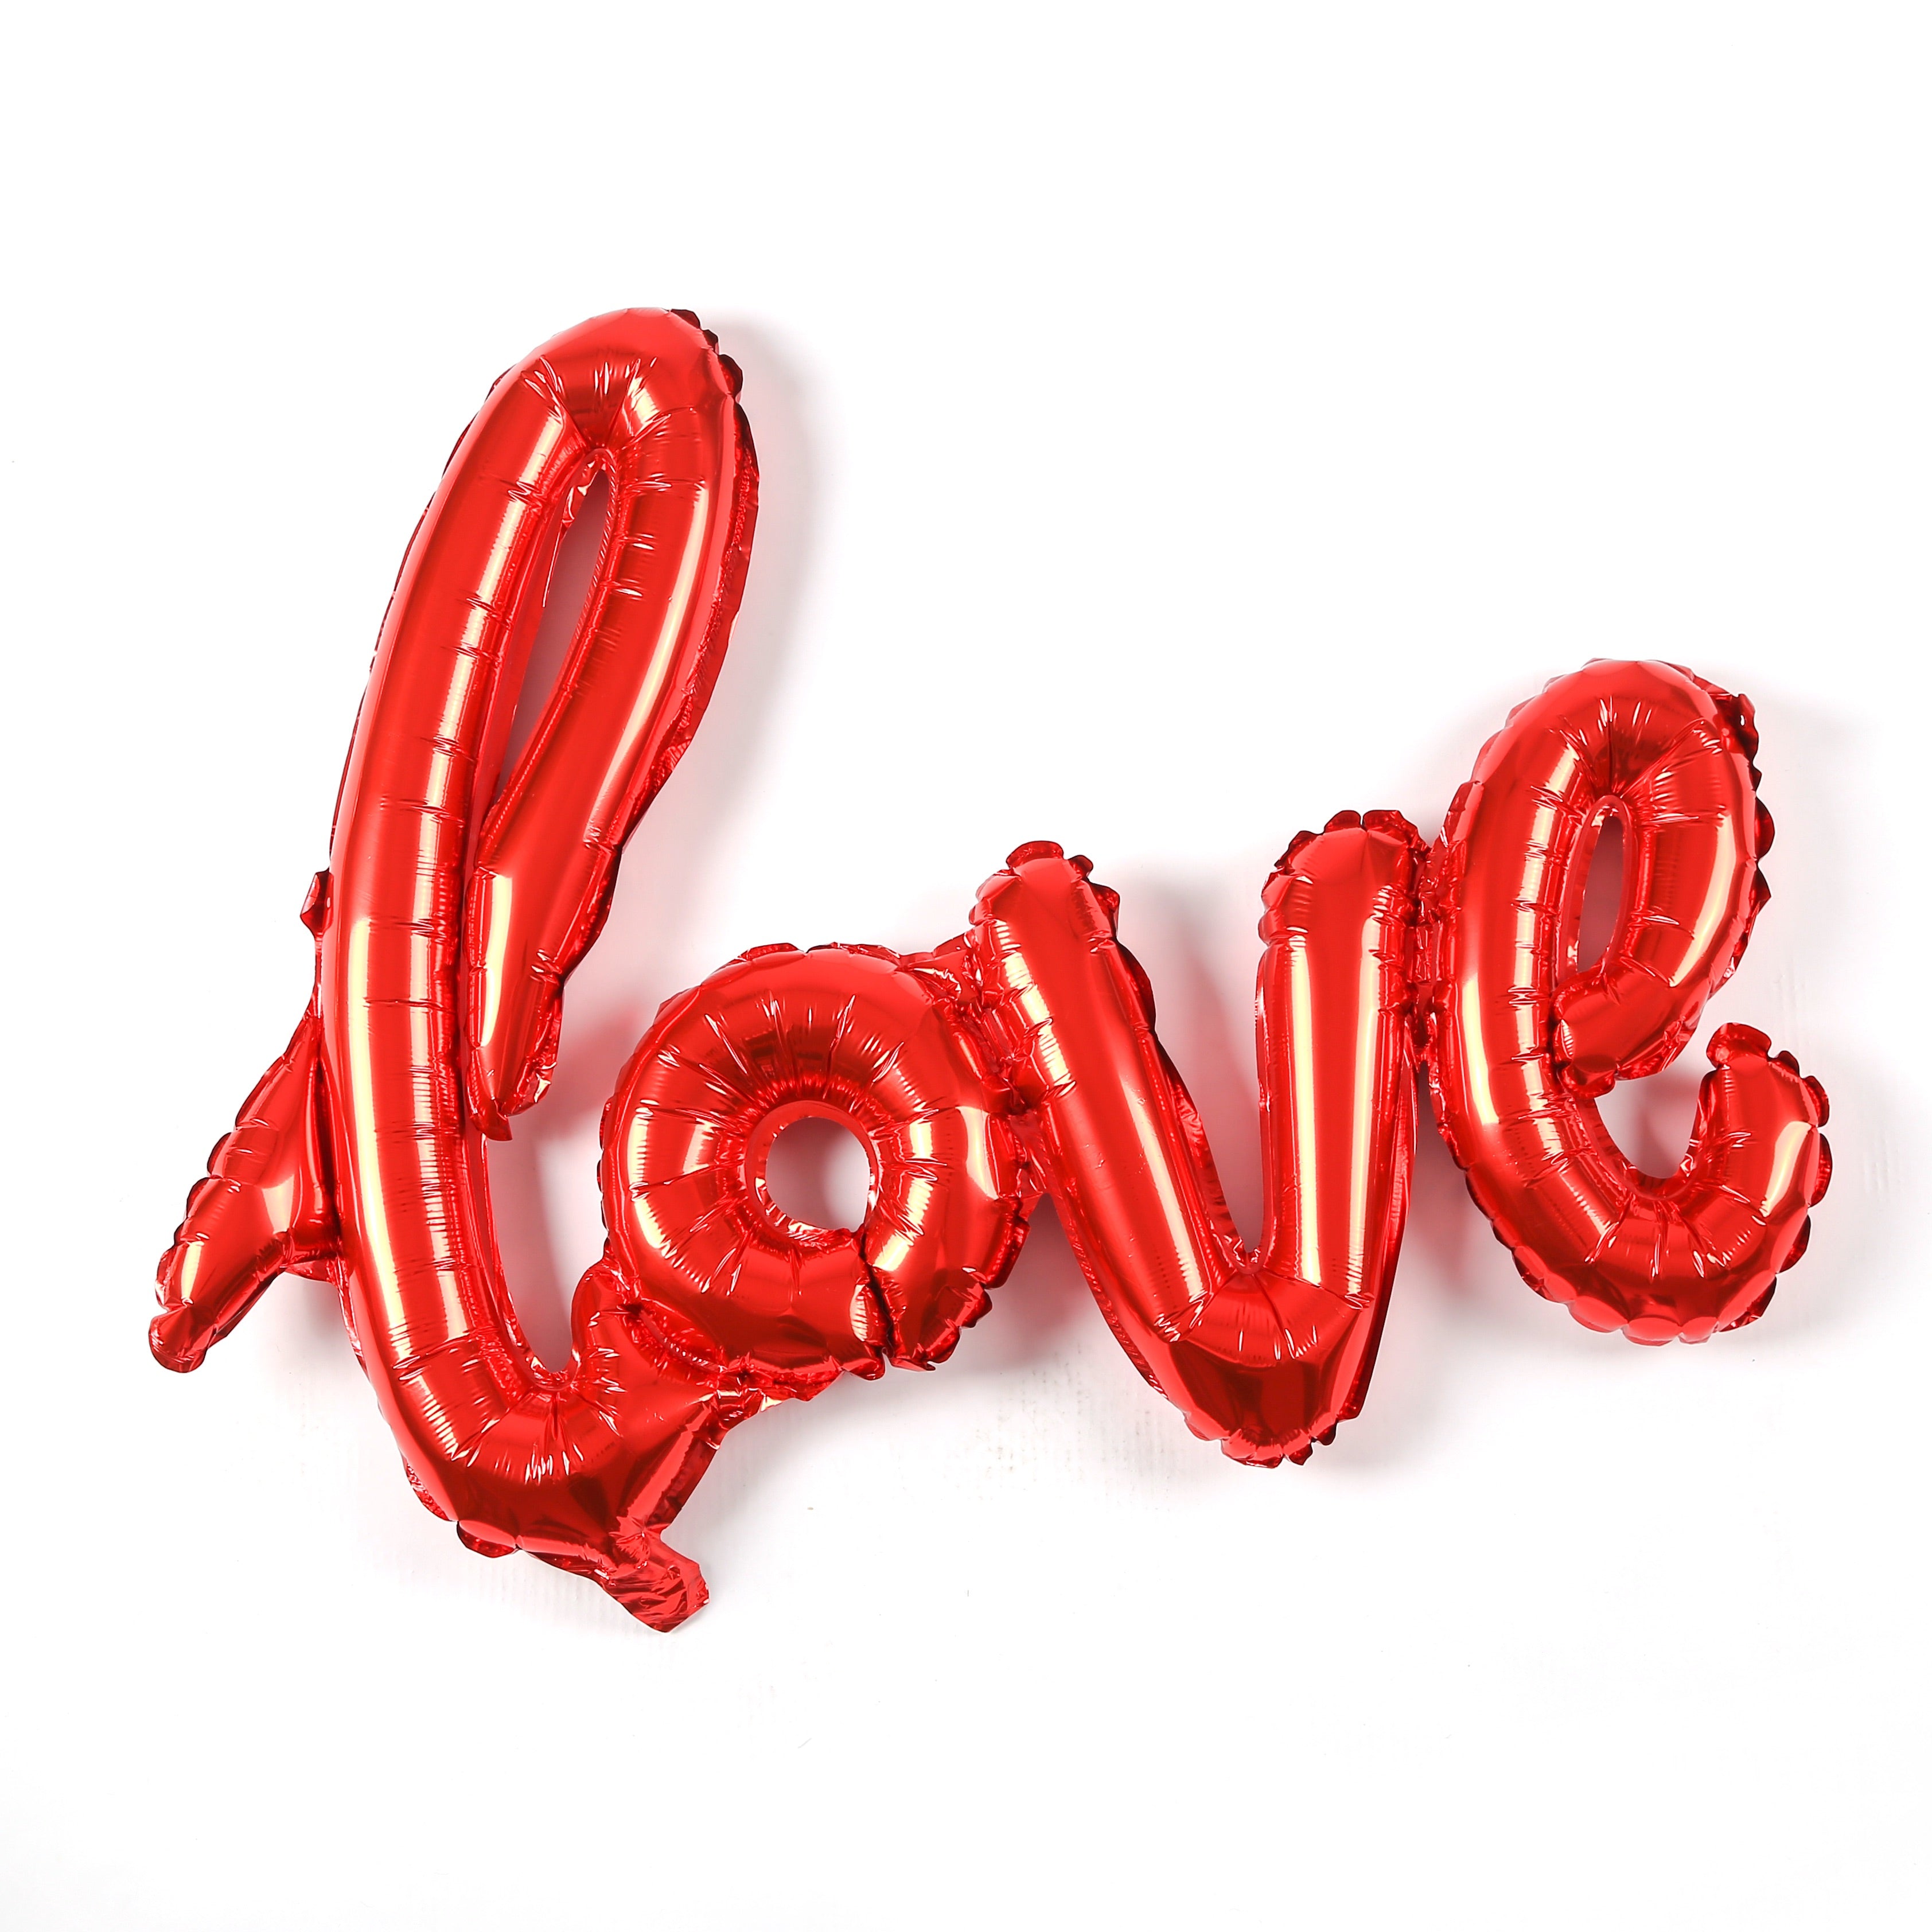 A giant red letter balloon of "LOVE". perfect for engagement, bridal shower, wedding and birthday theme. romantic party decoration